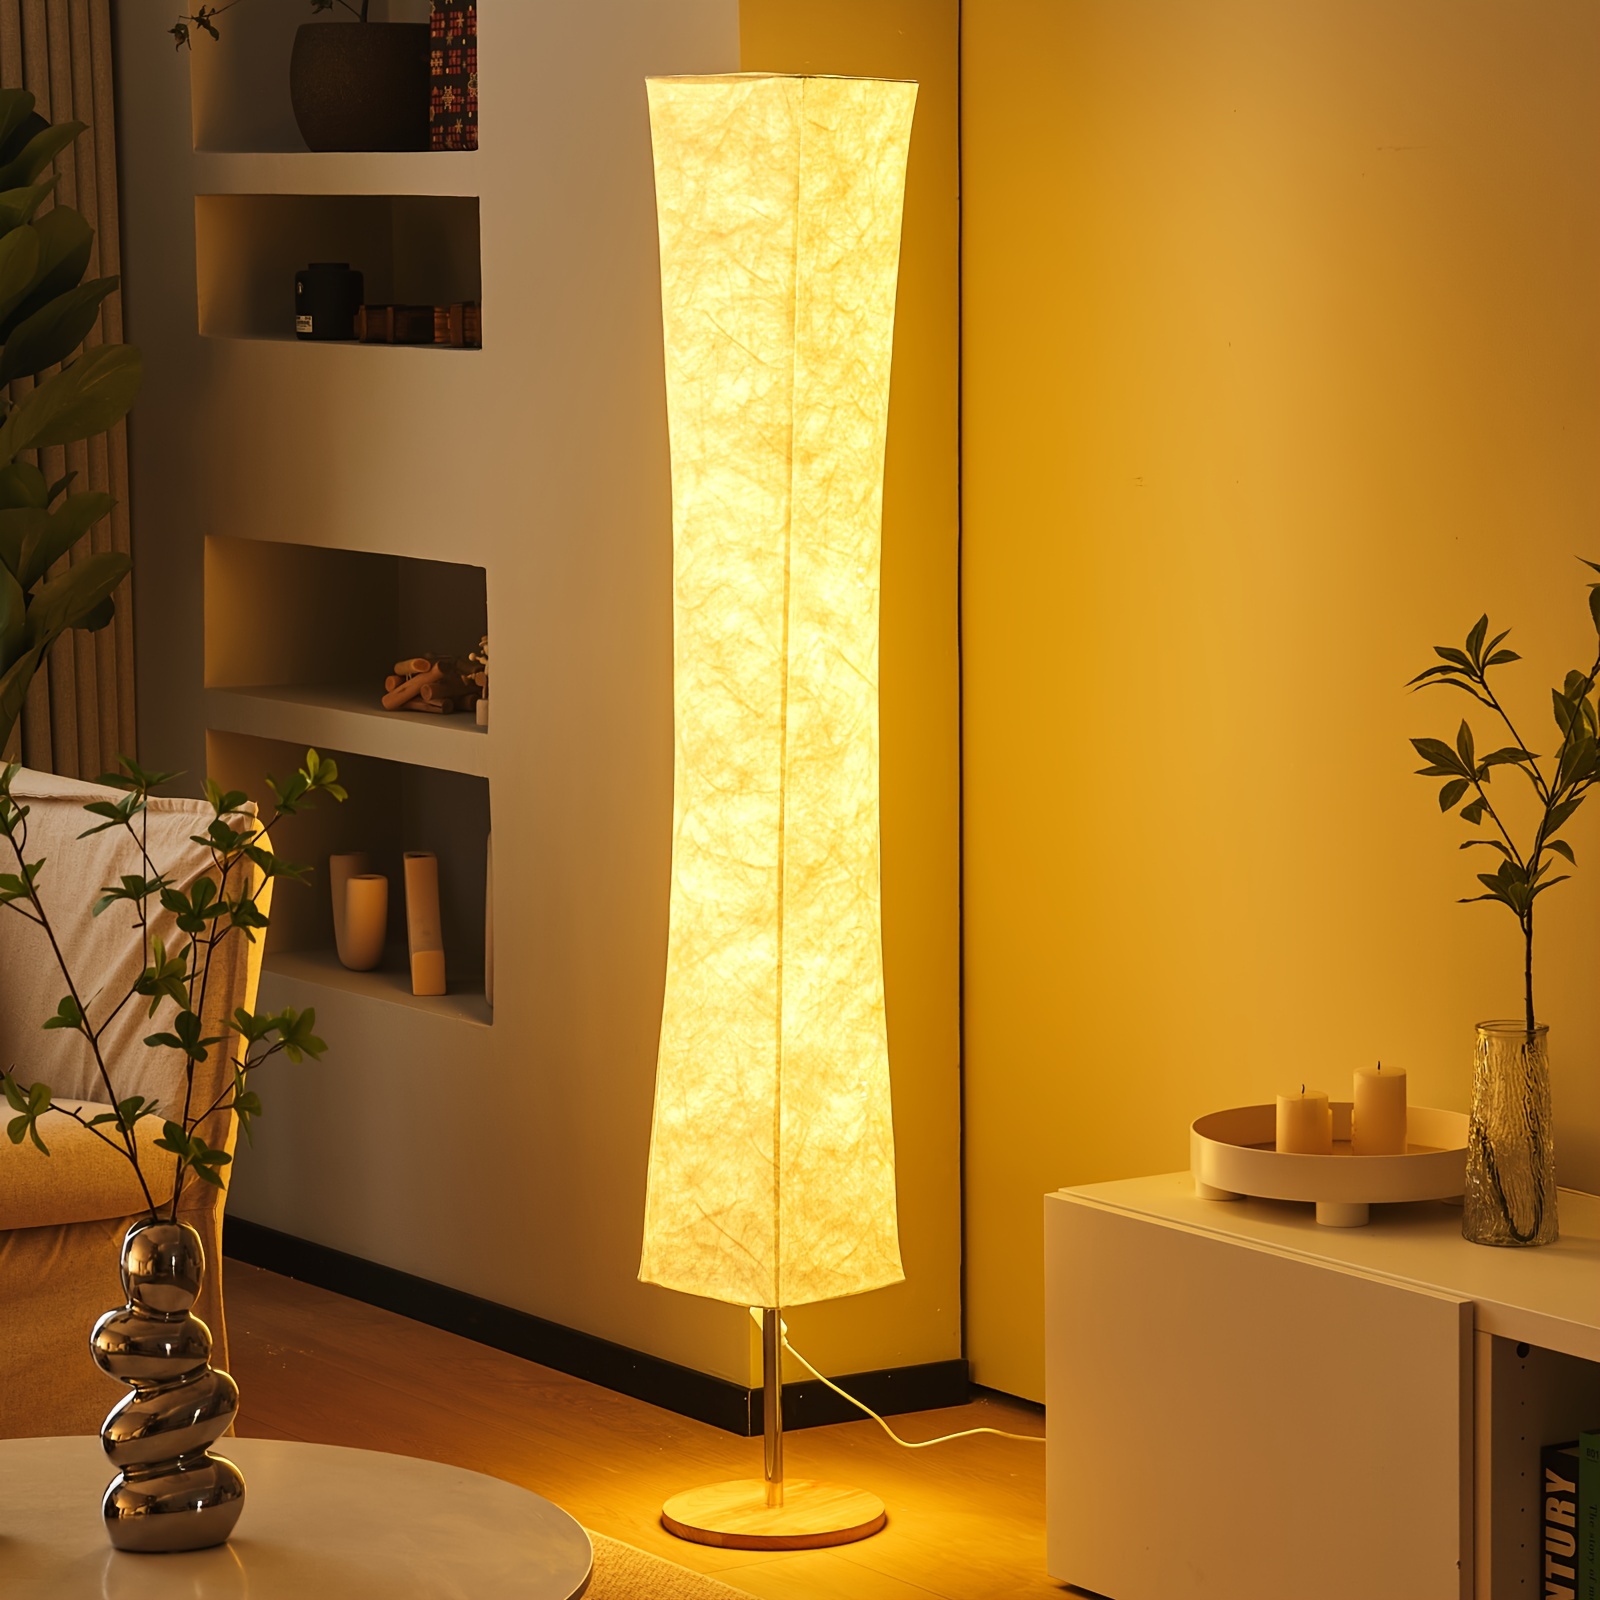 

1 Set Of Soft Floor Lamp, Waist Minimalist Design, Usb Modern Ultra-thin Warm Light 3000k Led Special Fabric Shade Balcony Light, Suitable For Living Room And Bedroom Gifts